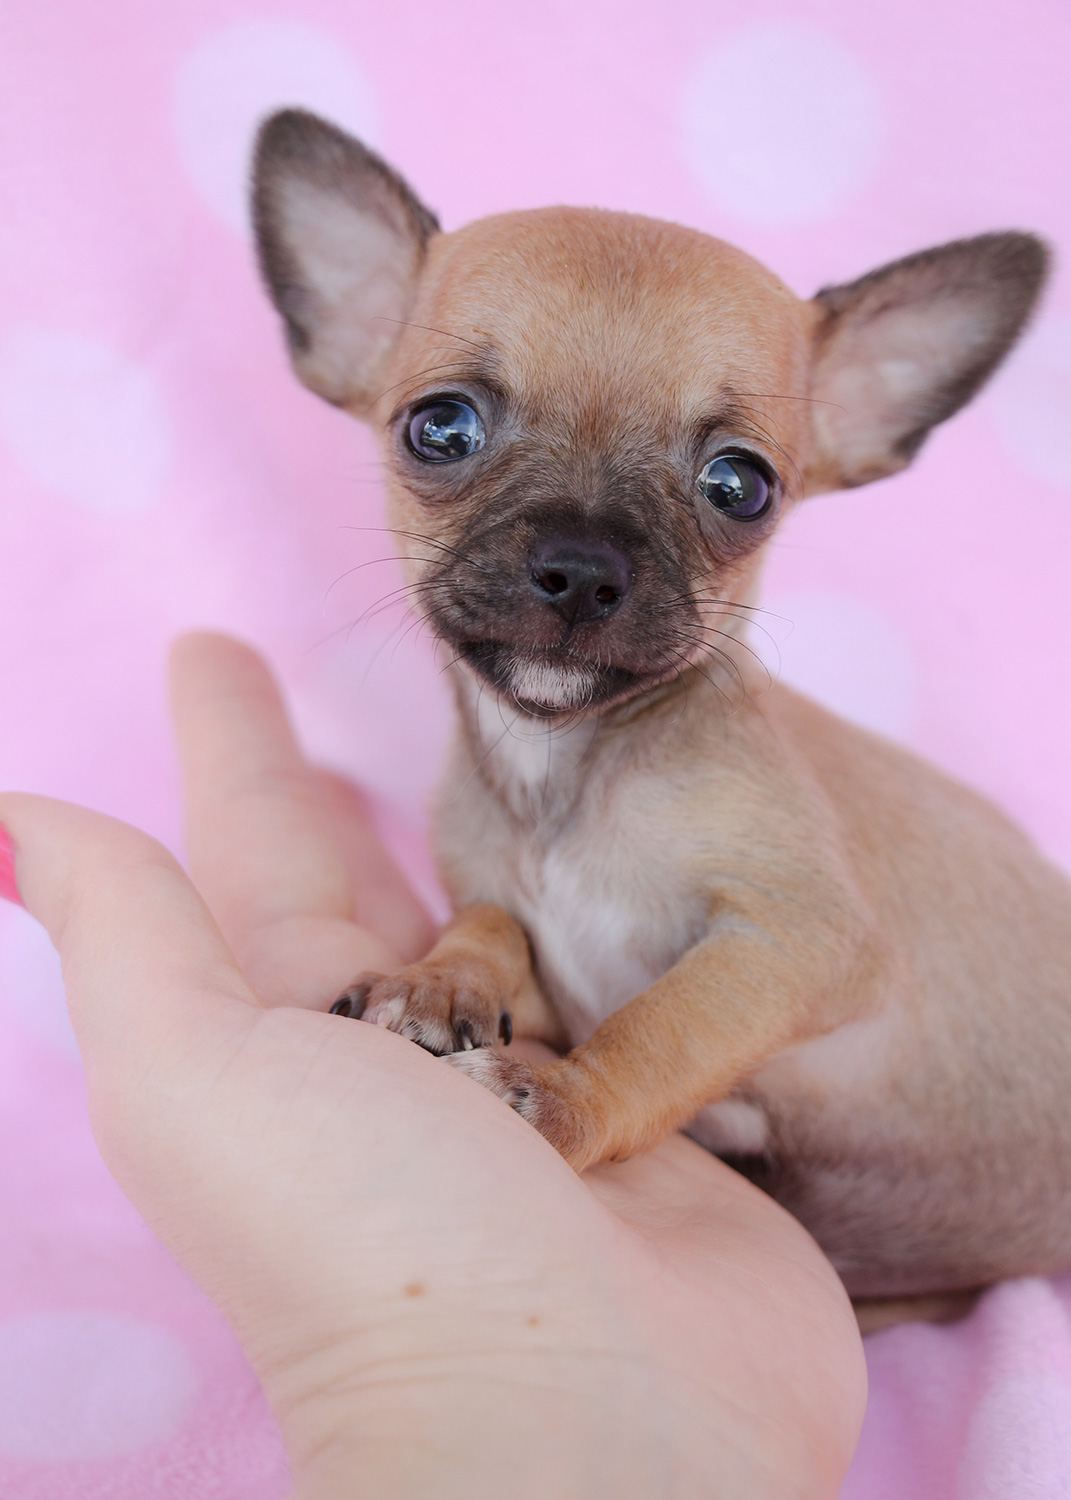 Tiny Chihuahuas For Sale at TeaCups Puppies South Florida | Teacups, Puppies & Boutique